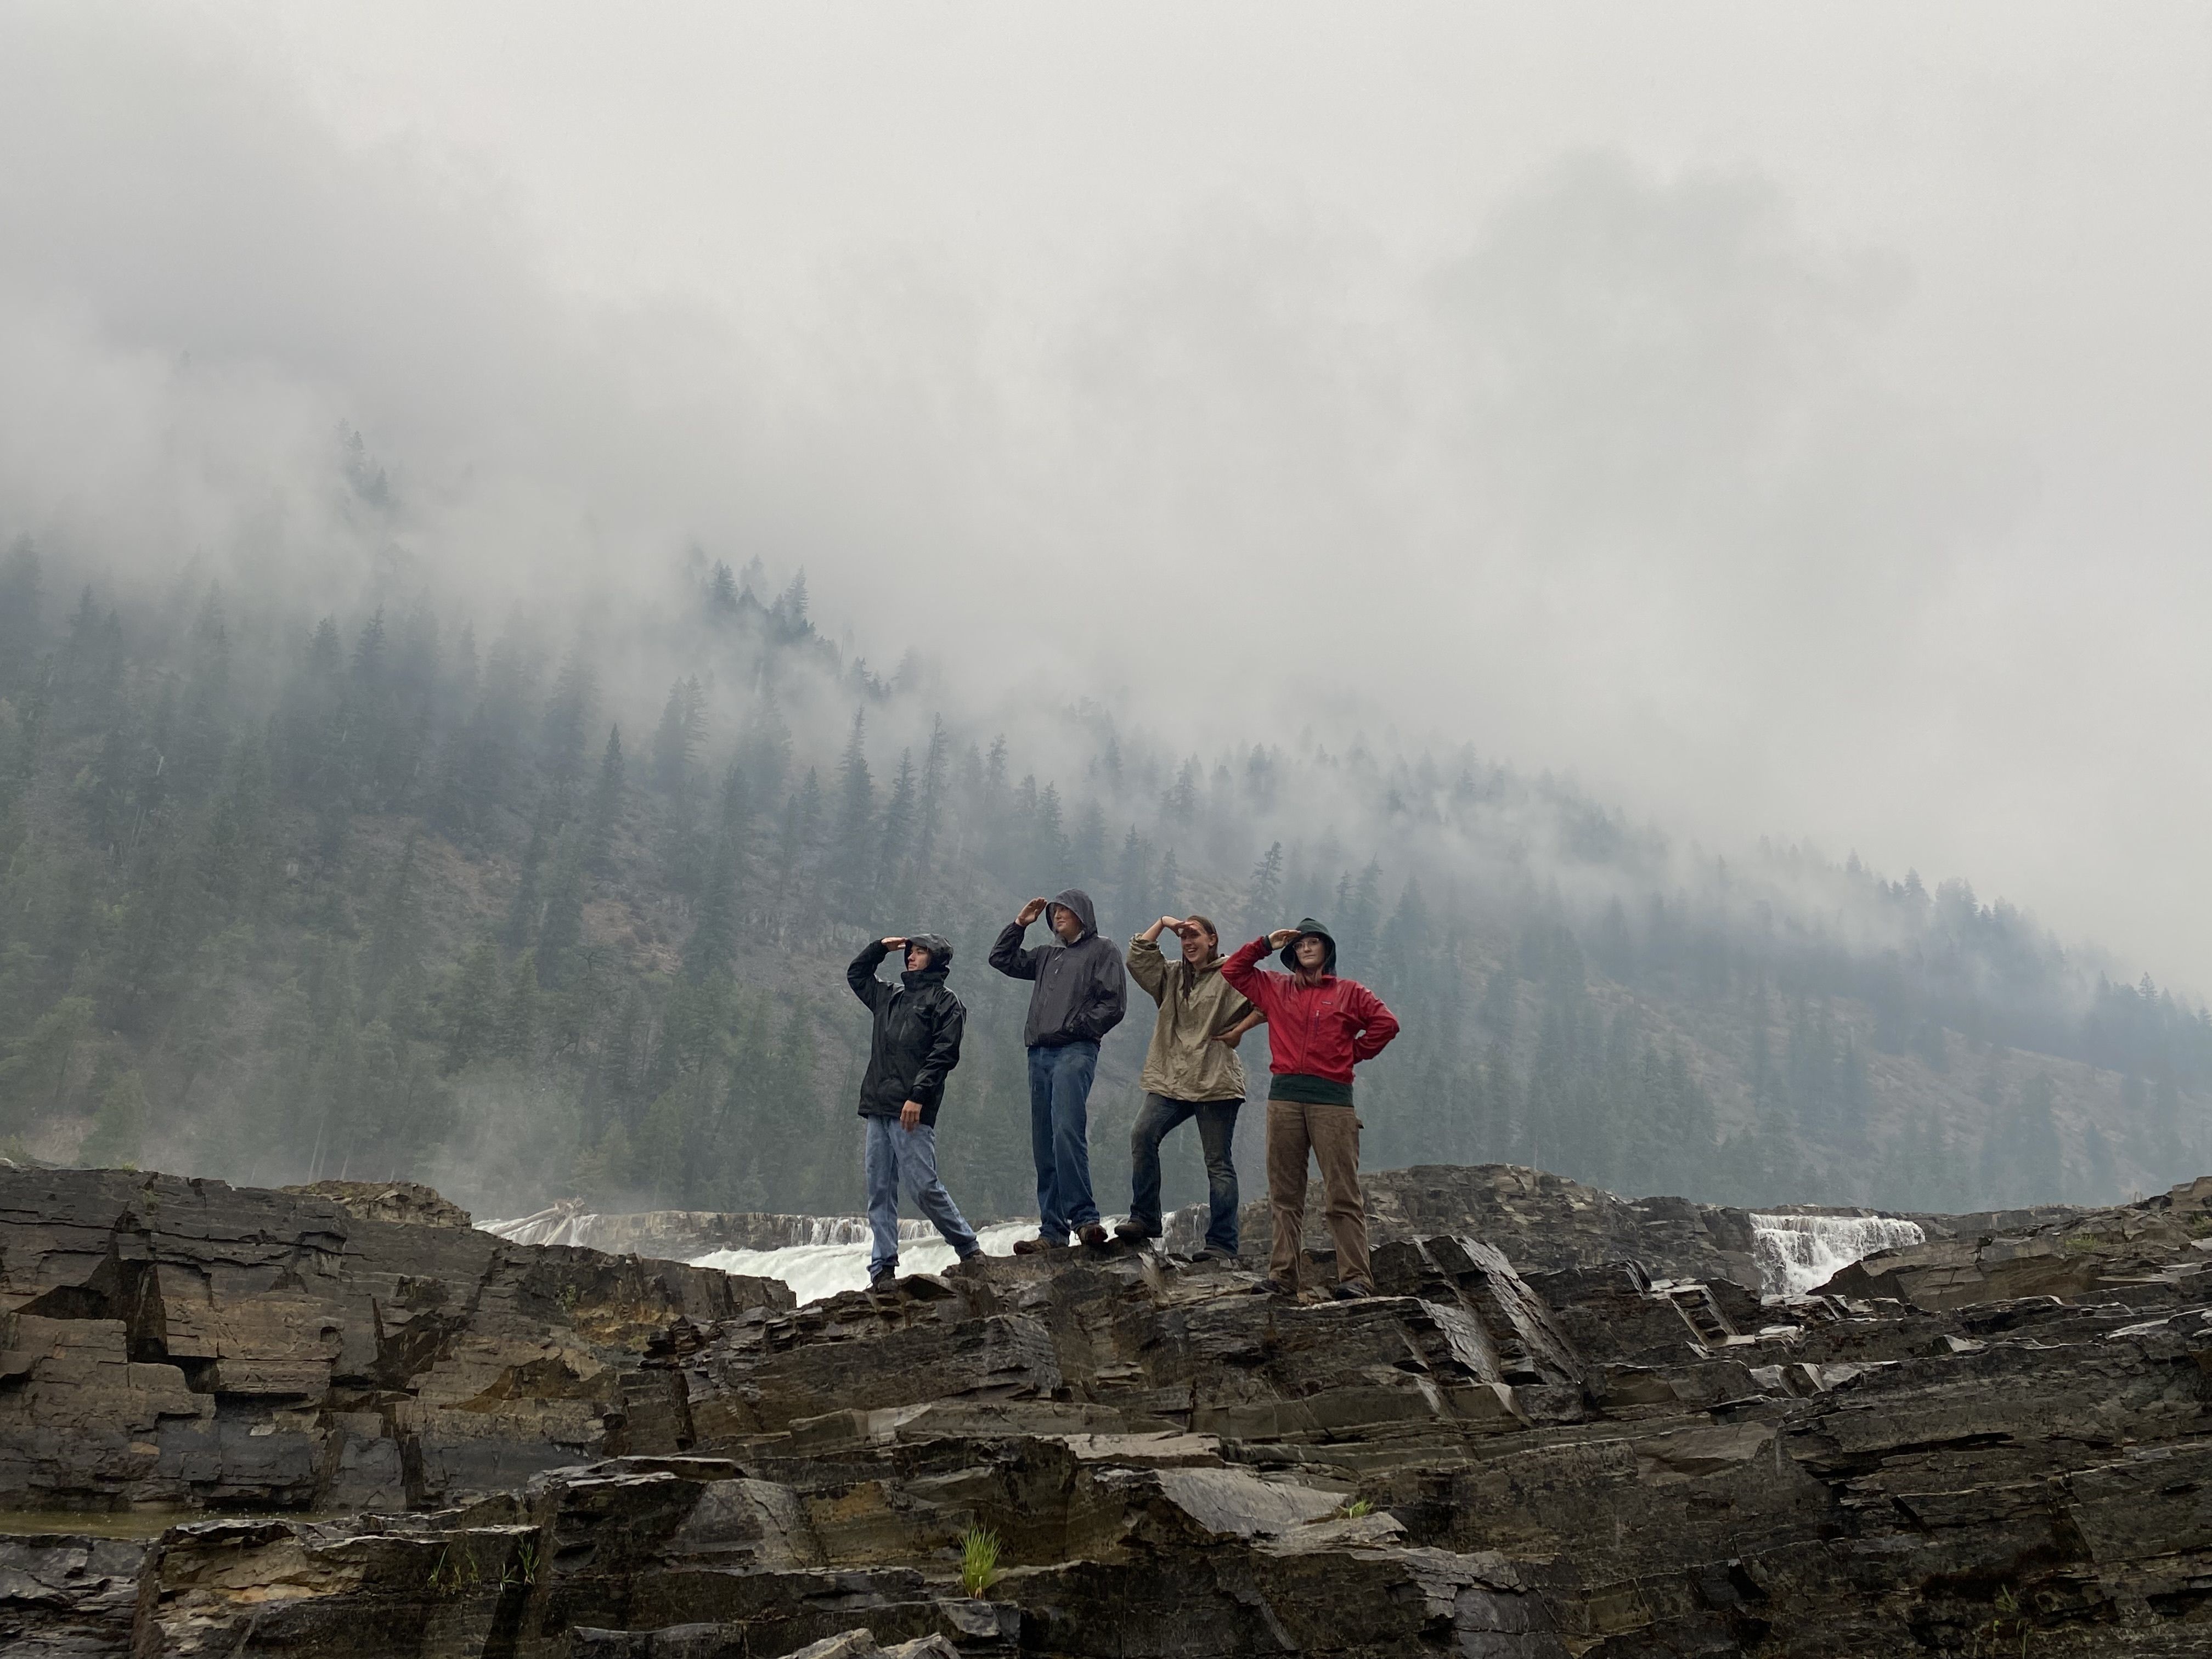 A crew stands on some rocks looking to the left, in front of a misty, forested hillside